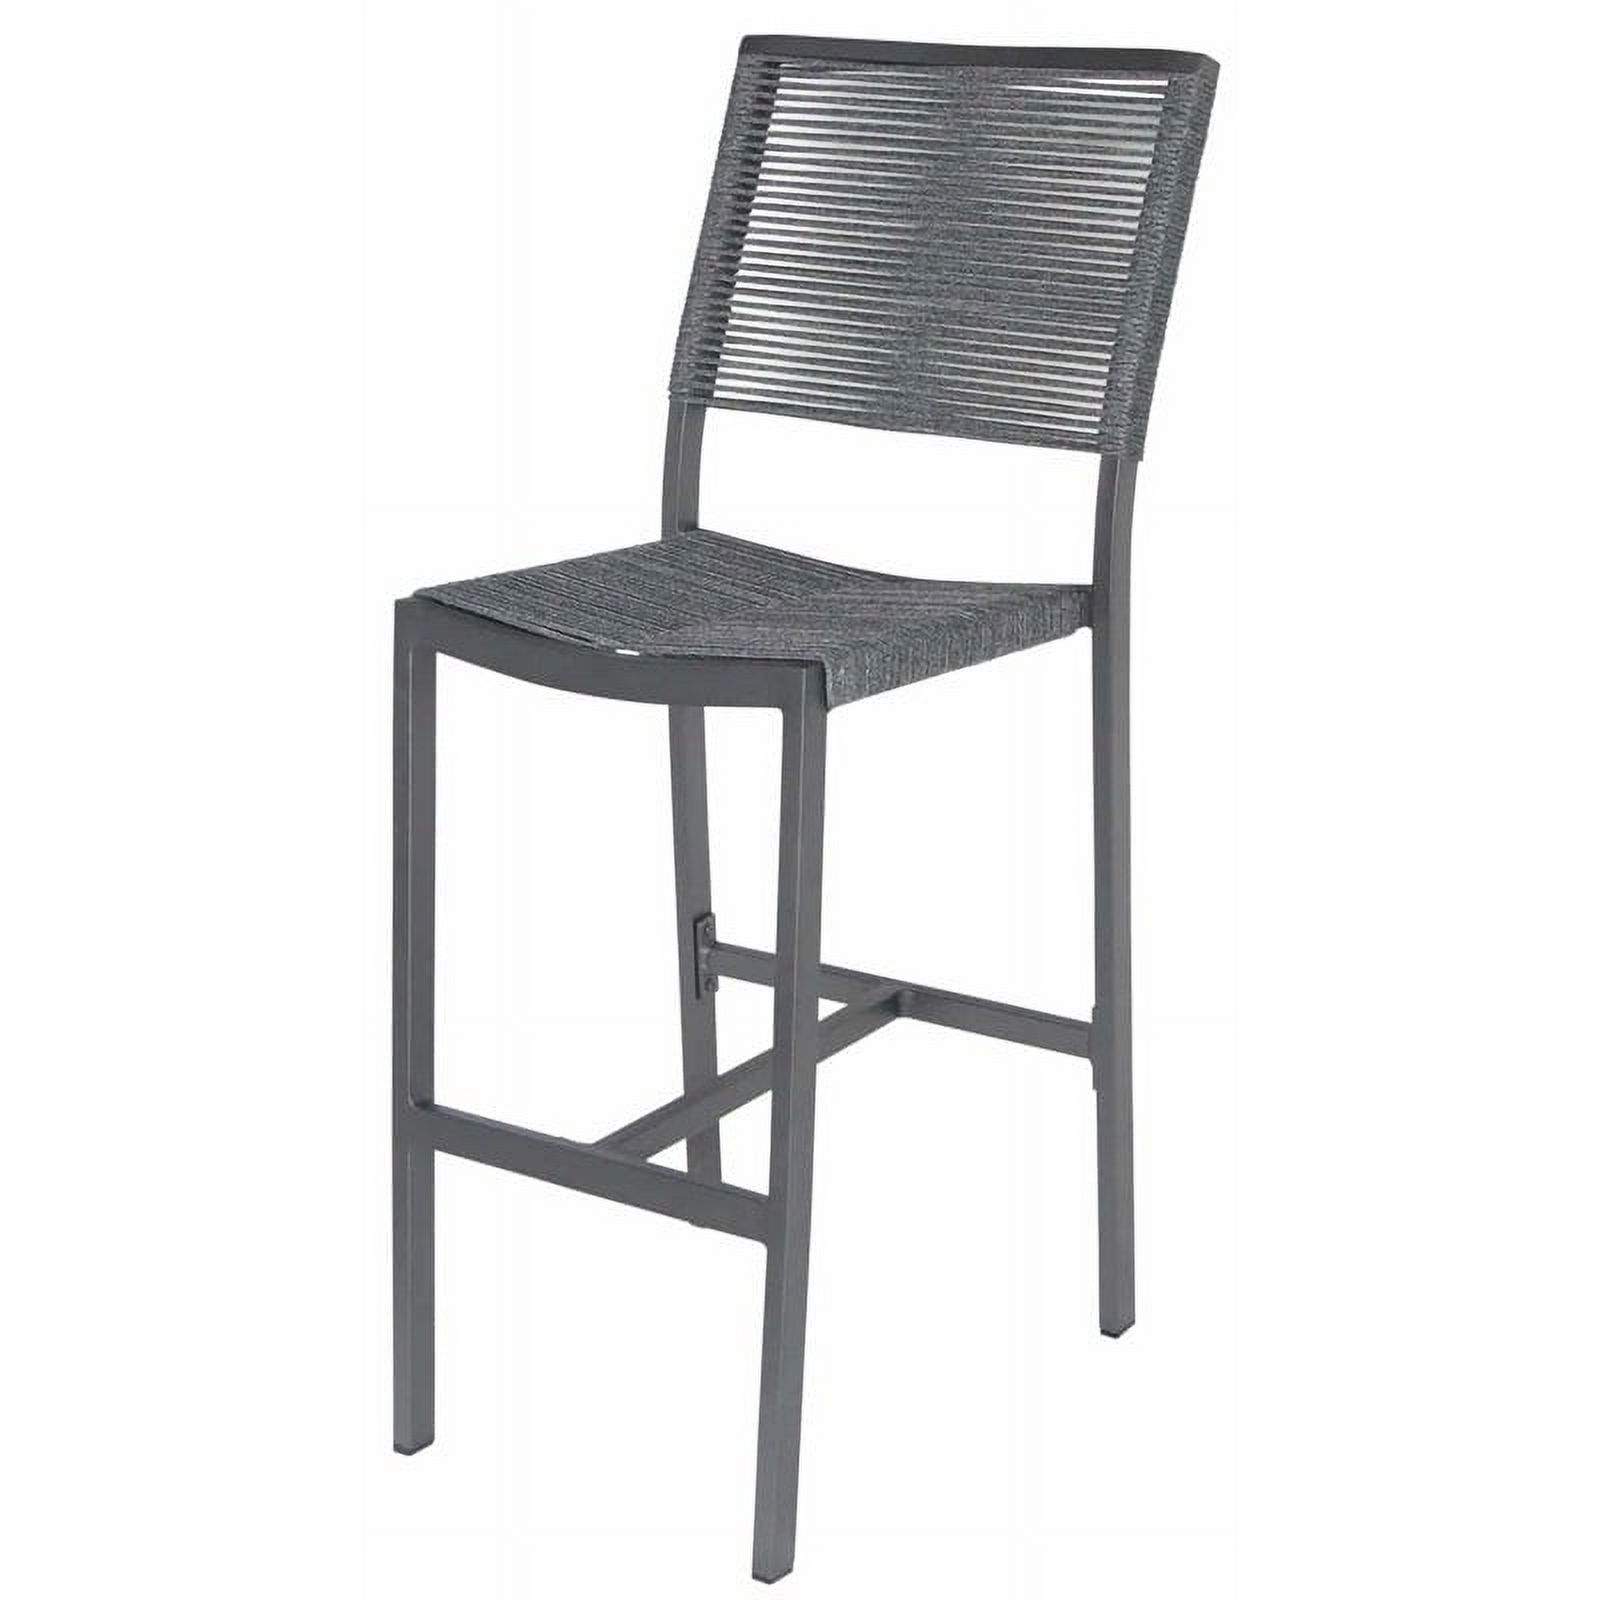 Source Furniture Fiji Aluminum Frame Patio Bar Side Stool in Charcoal Rope - image 1 of 1